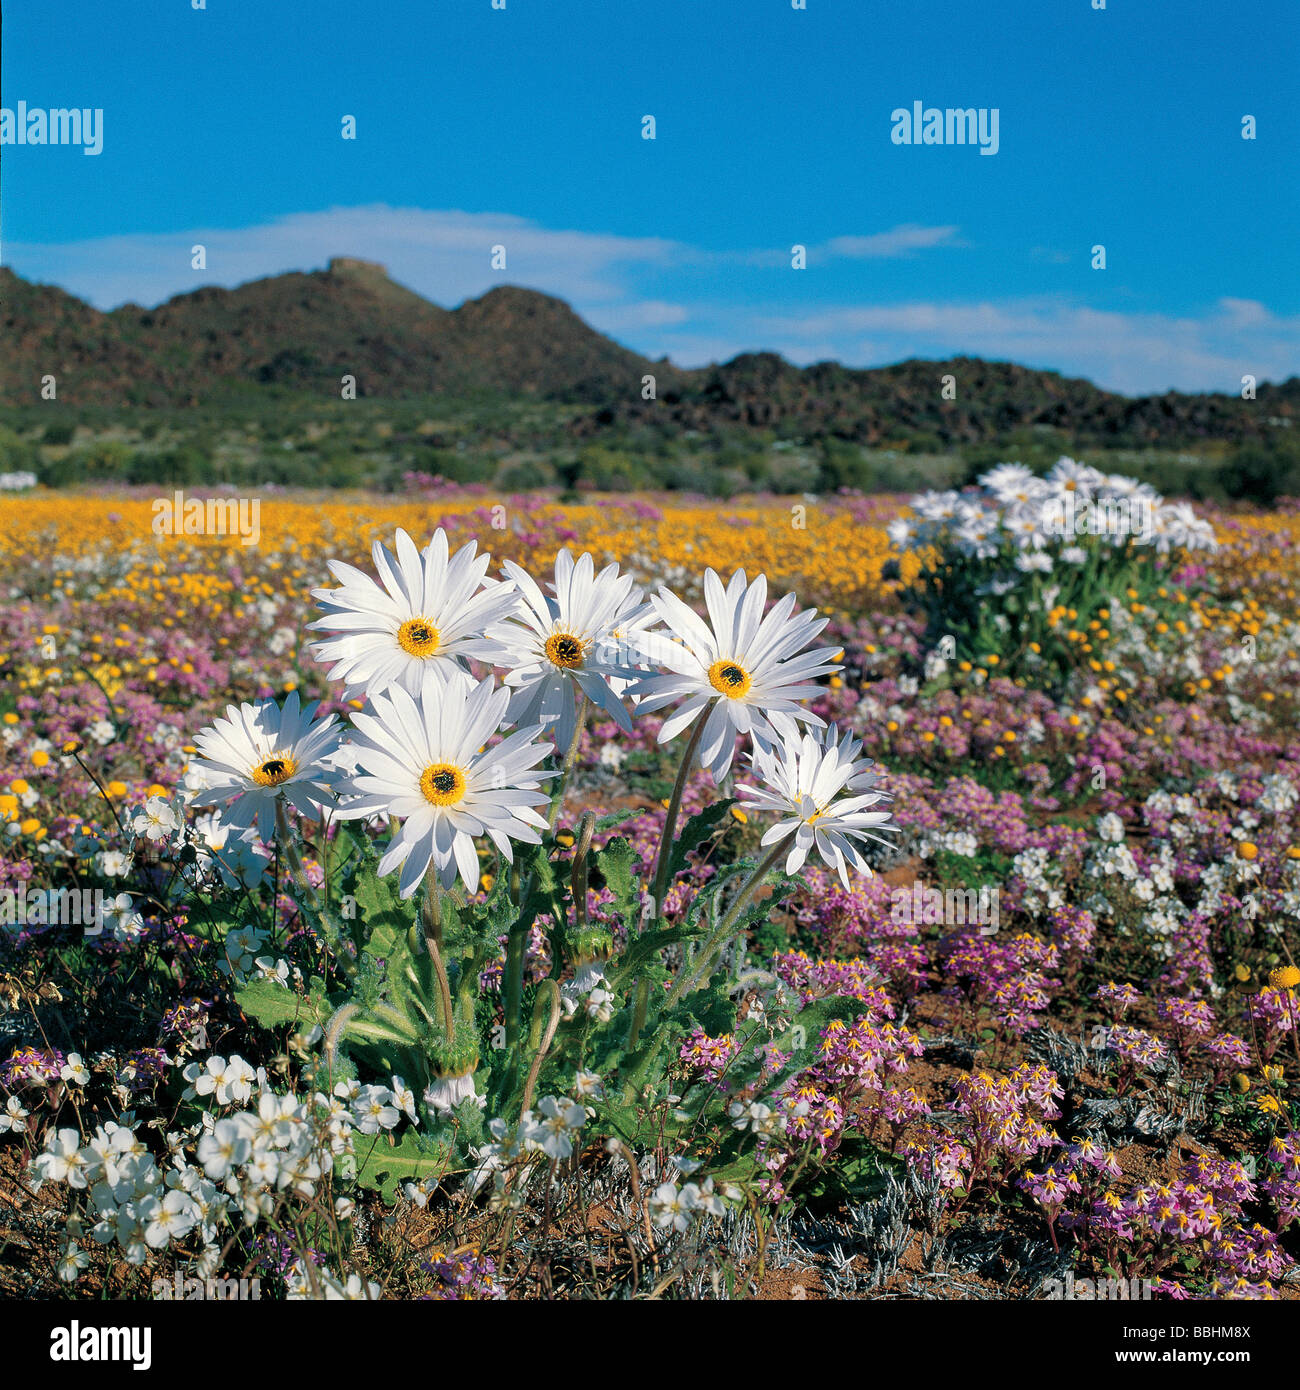 NAMAQUALAND IS HOST TO MORE THAN 2500 WILDFLOWER SPECIES Stock Photo